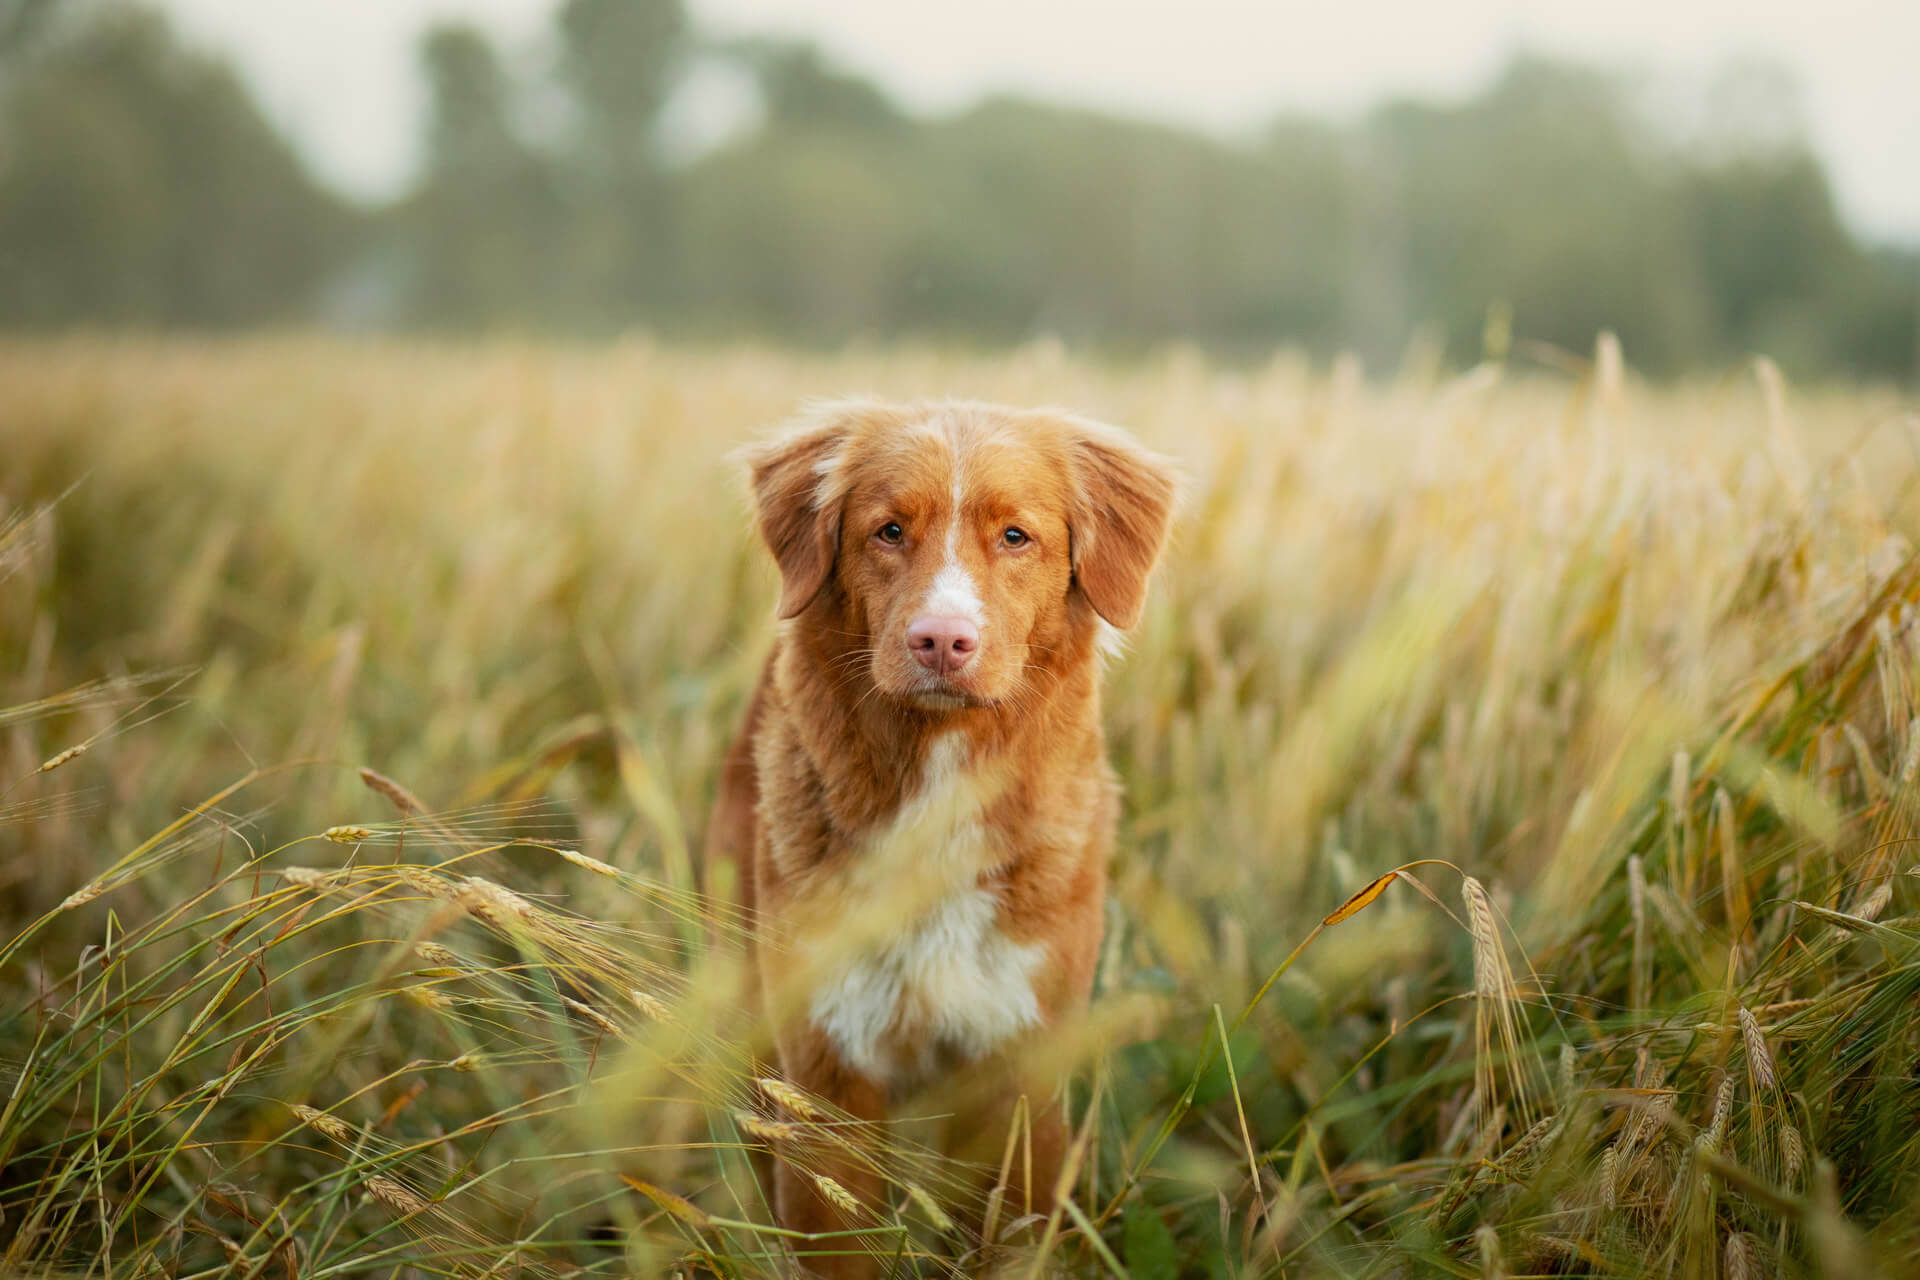 brown and white dog standing in field of grass awns